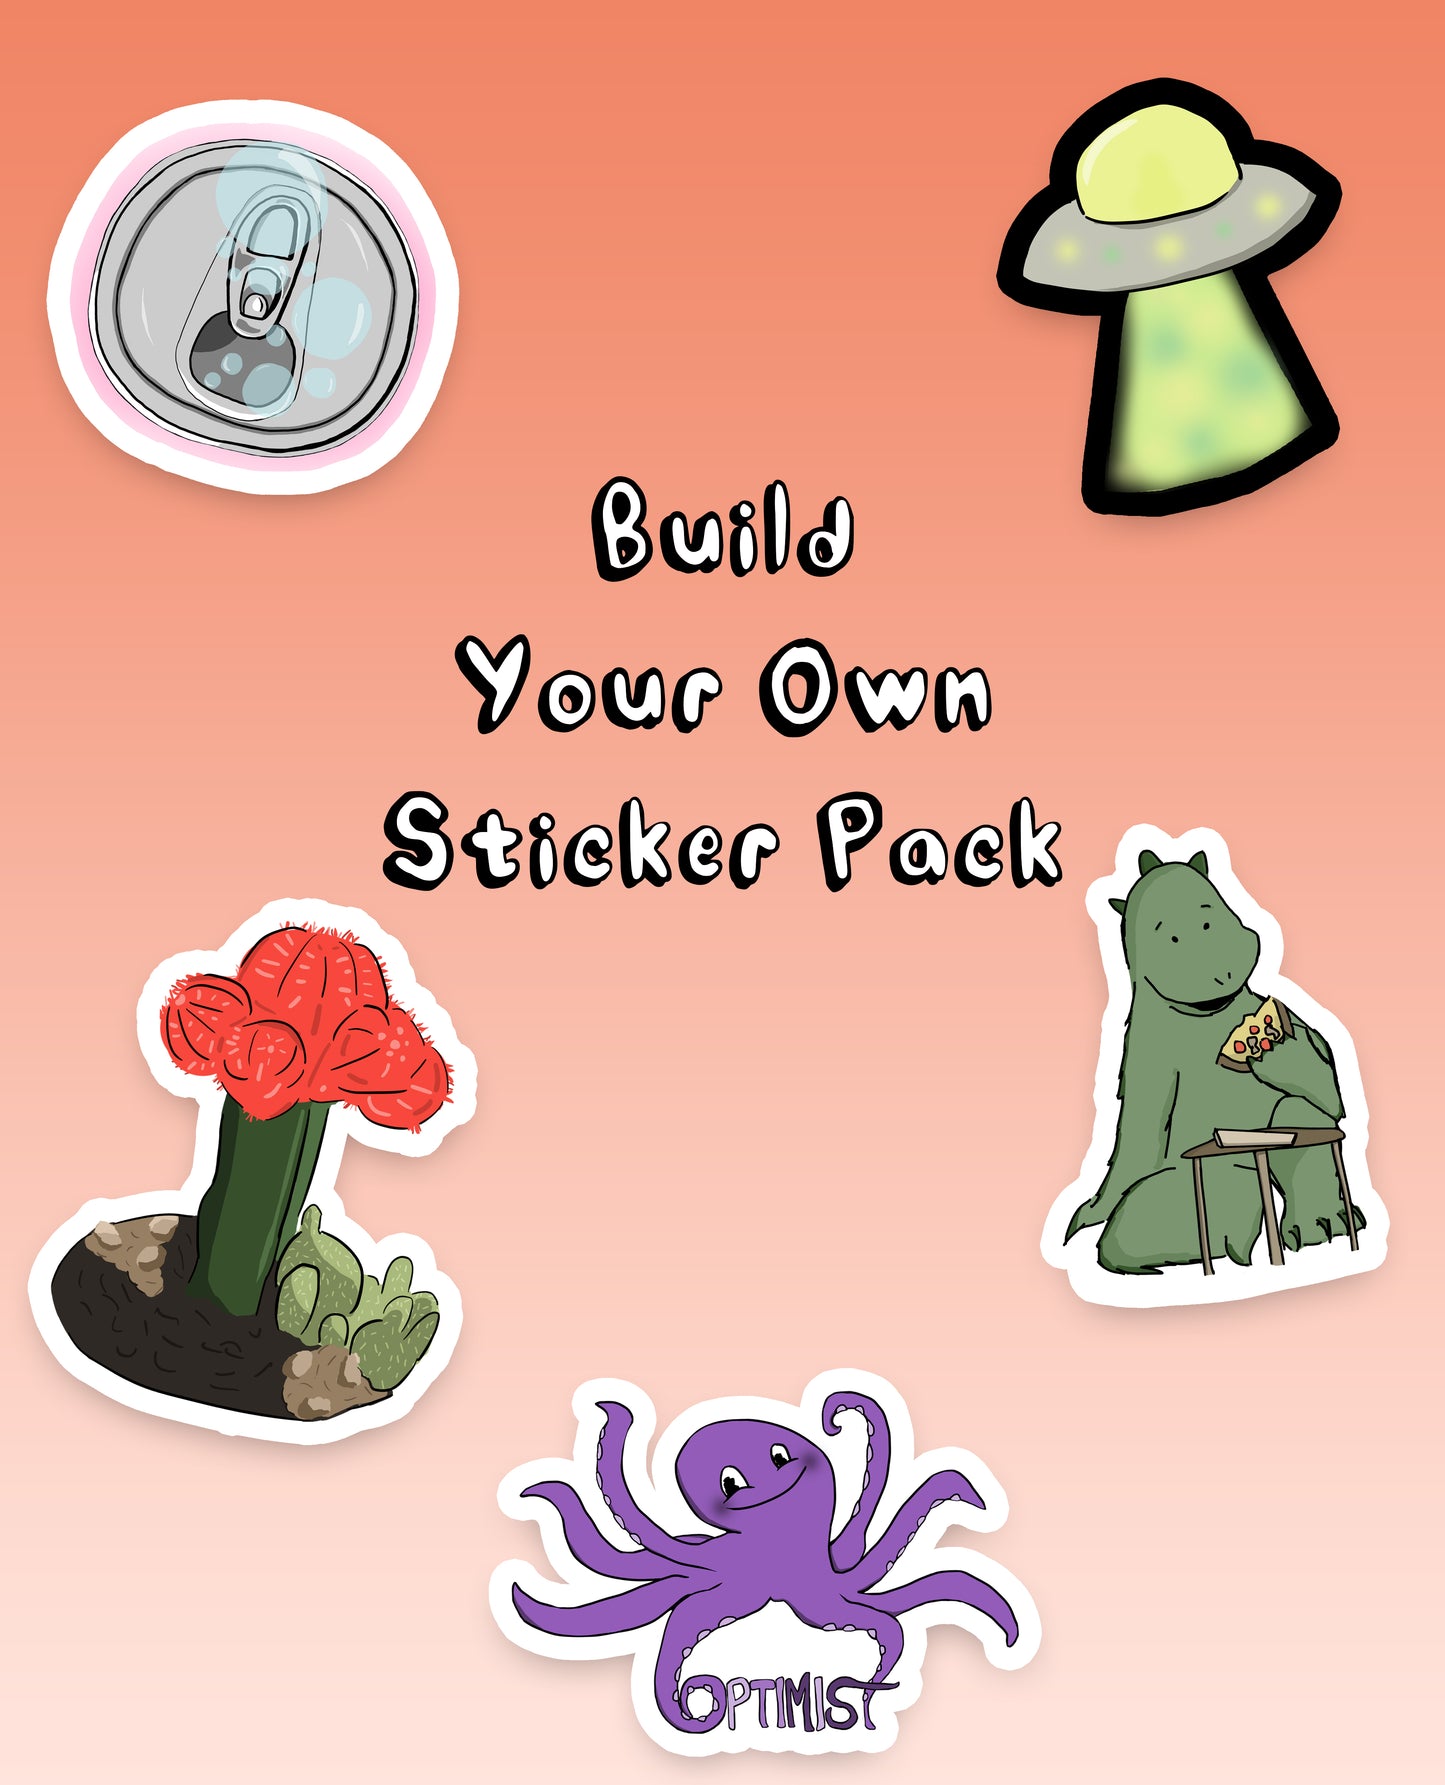 Create Your Own Sticker Pack